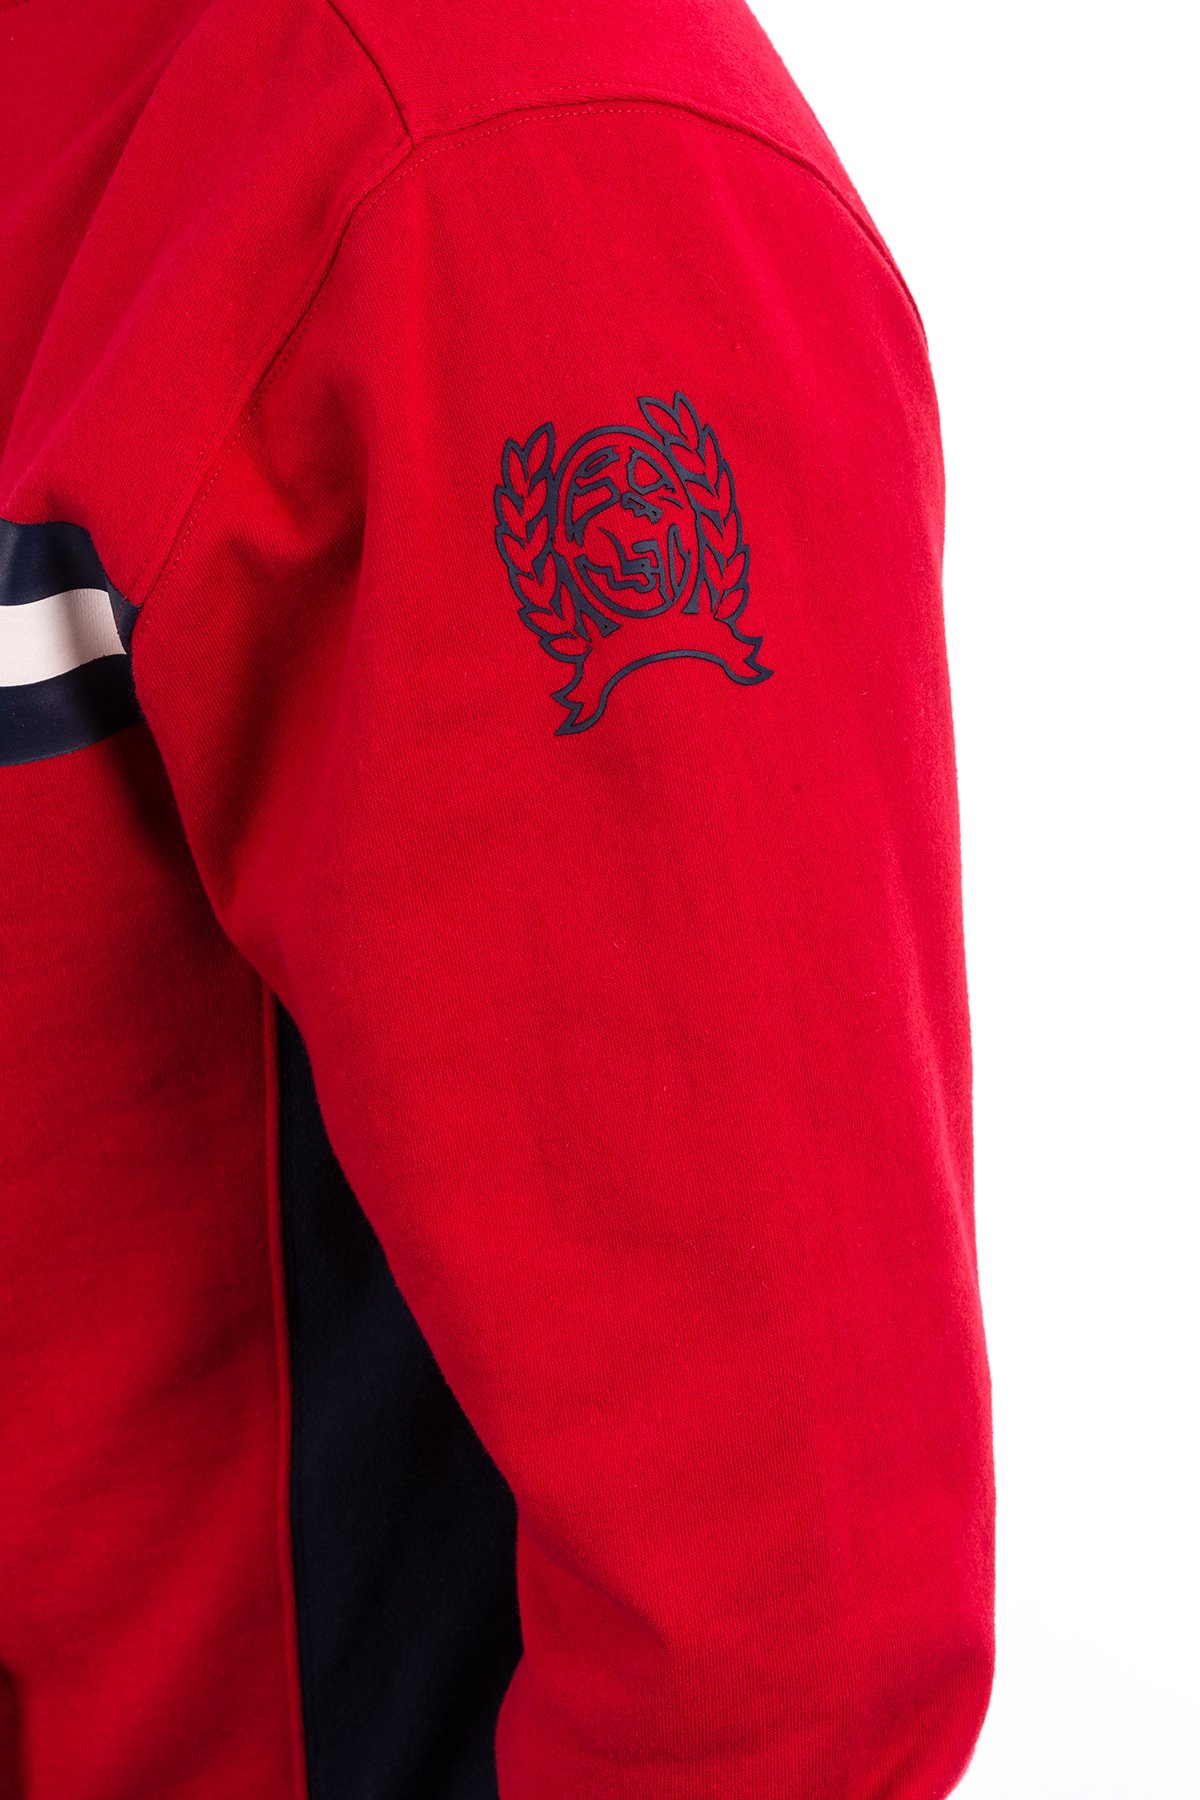 CINCH Jeans | Men's Red and Black Cotton-Poly Fleece Hoodie With ...